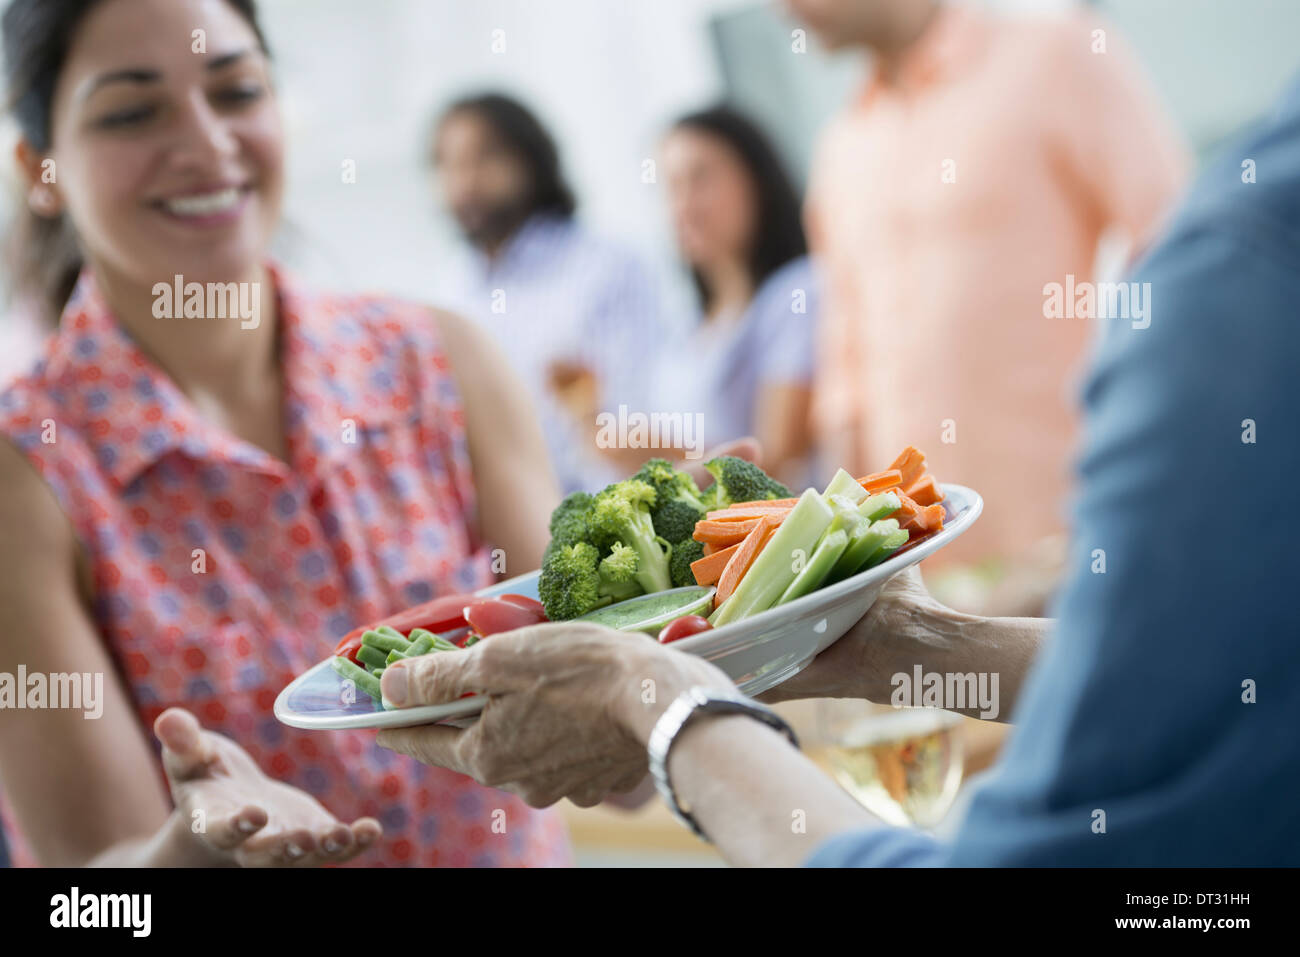 salad buffet of mixed ages and ethnicities meeting together Stock Photo